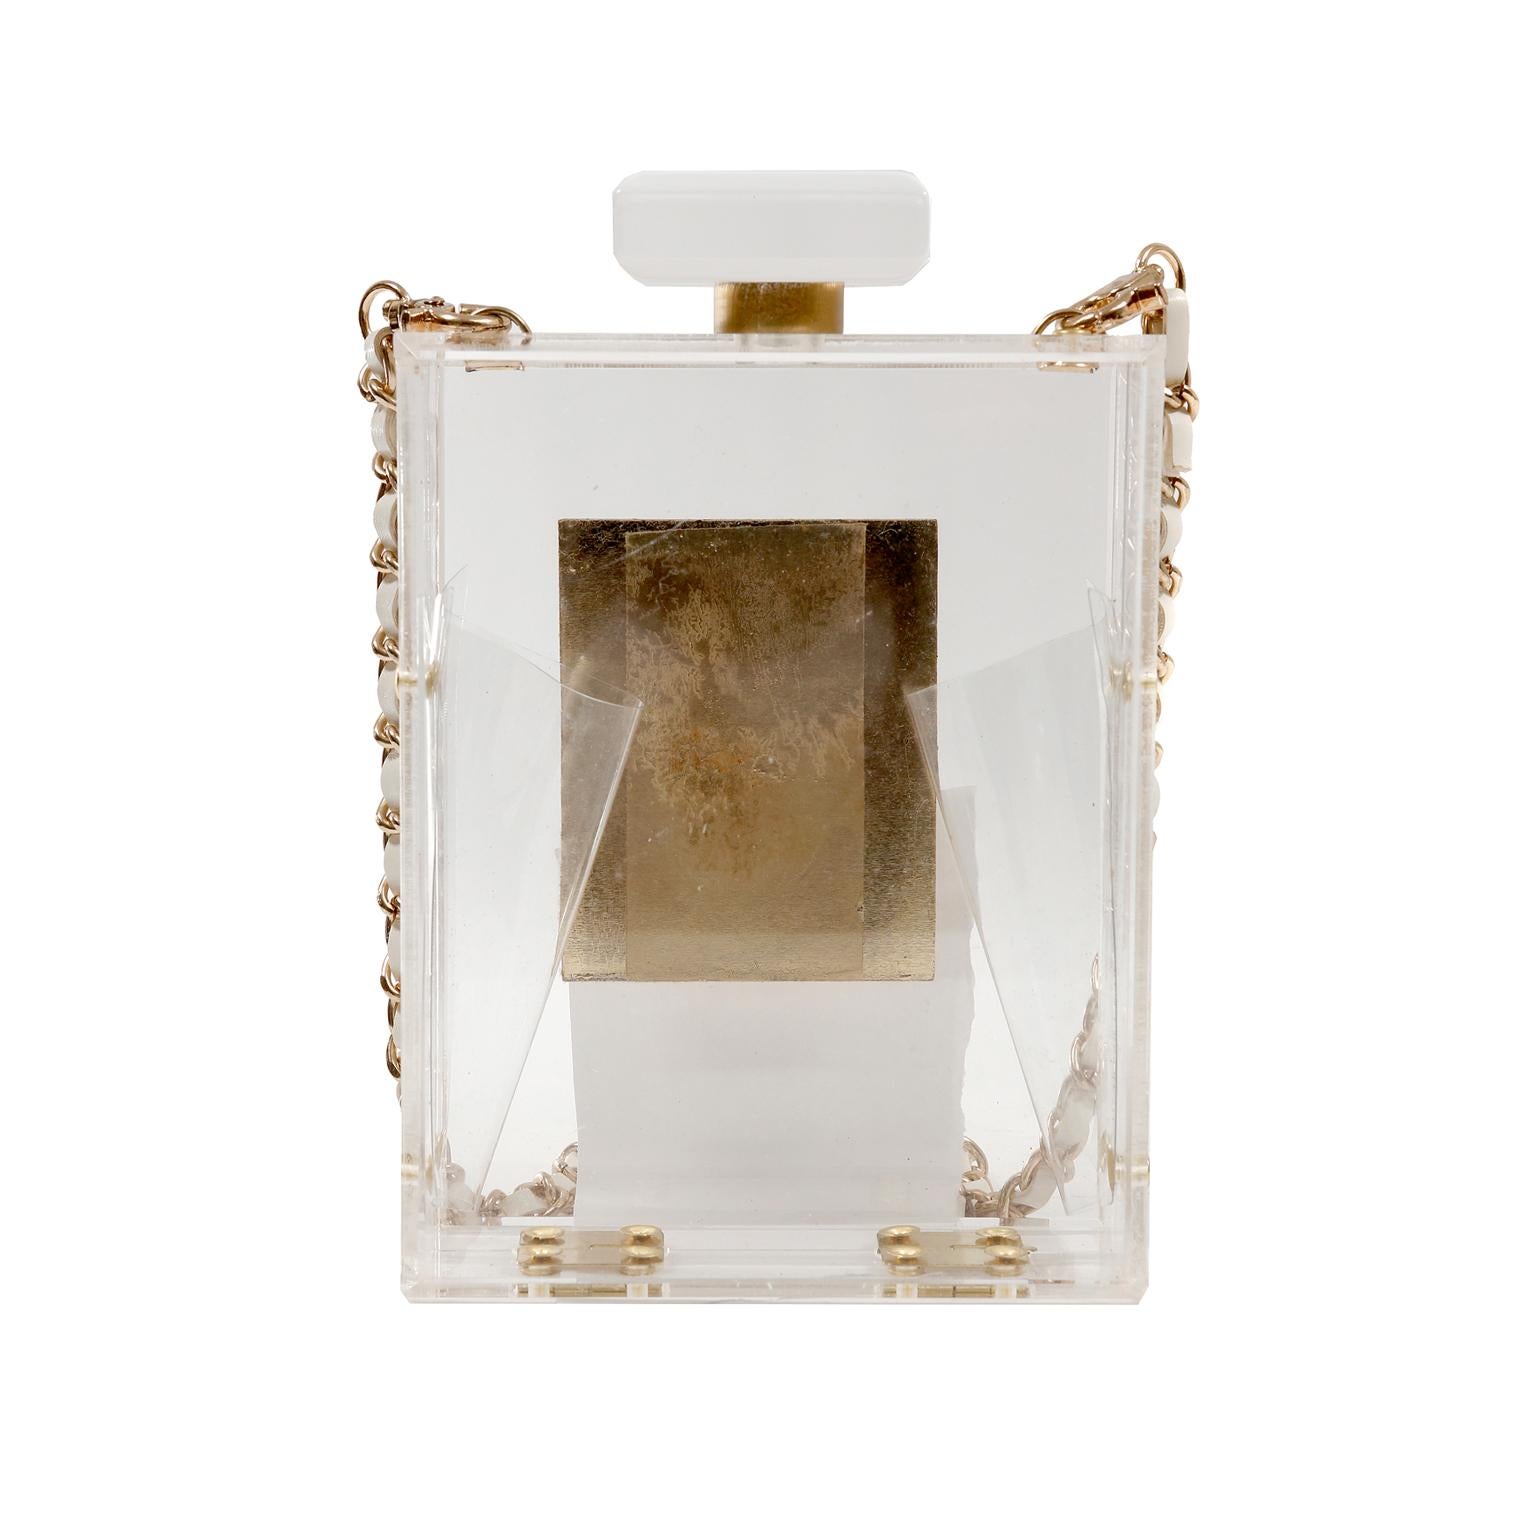 This authentic Chanel Plexiglass No. 5 Perfume Bottle Bag is a runway piece in excellent condition.  Extremely rare, it is a must have piece for any collection.
Clear durable plexiglass No. 5 perfume bottle silhouette has gold tone accents.  Hinged